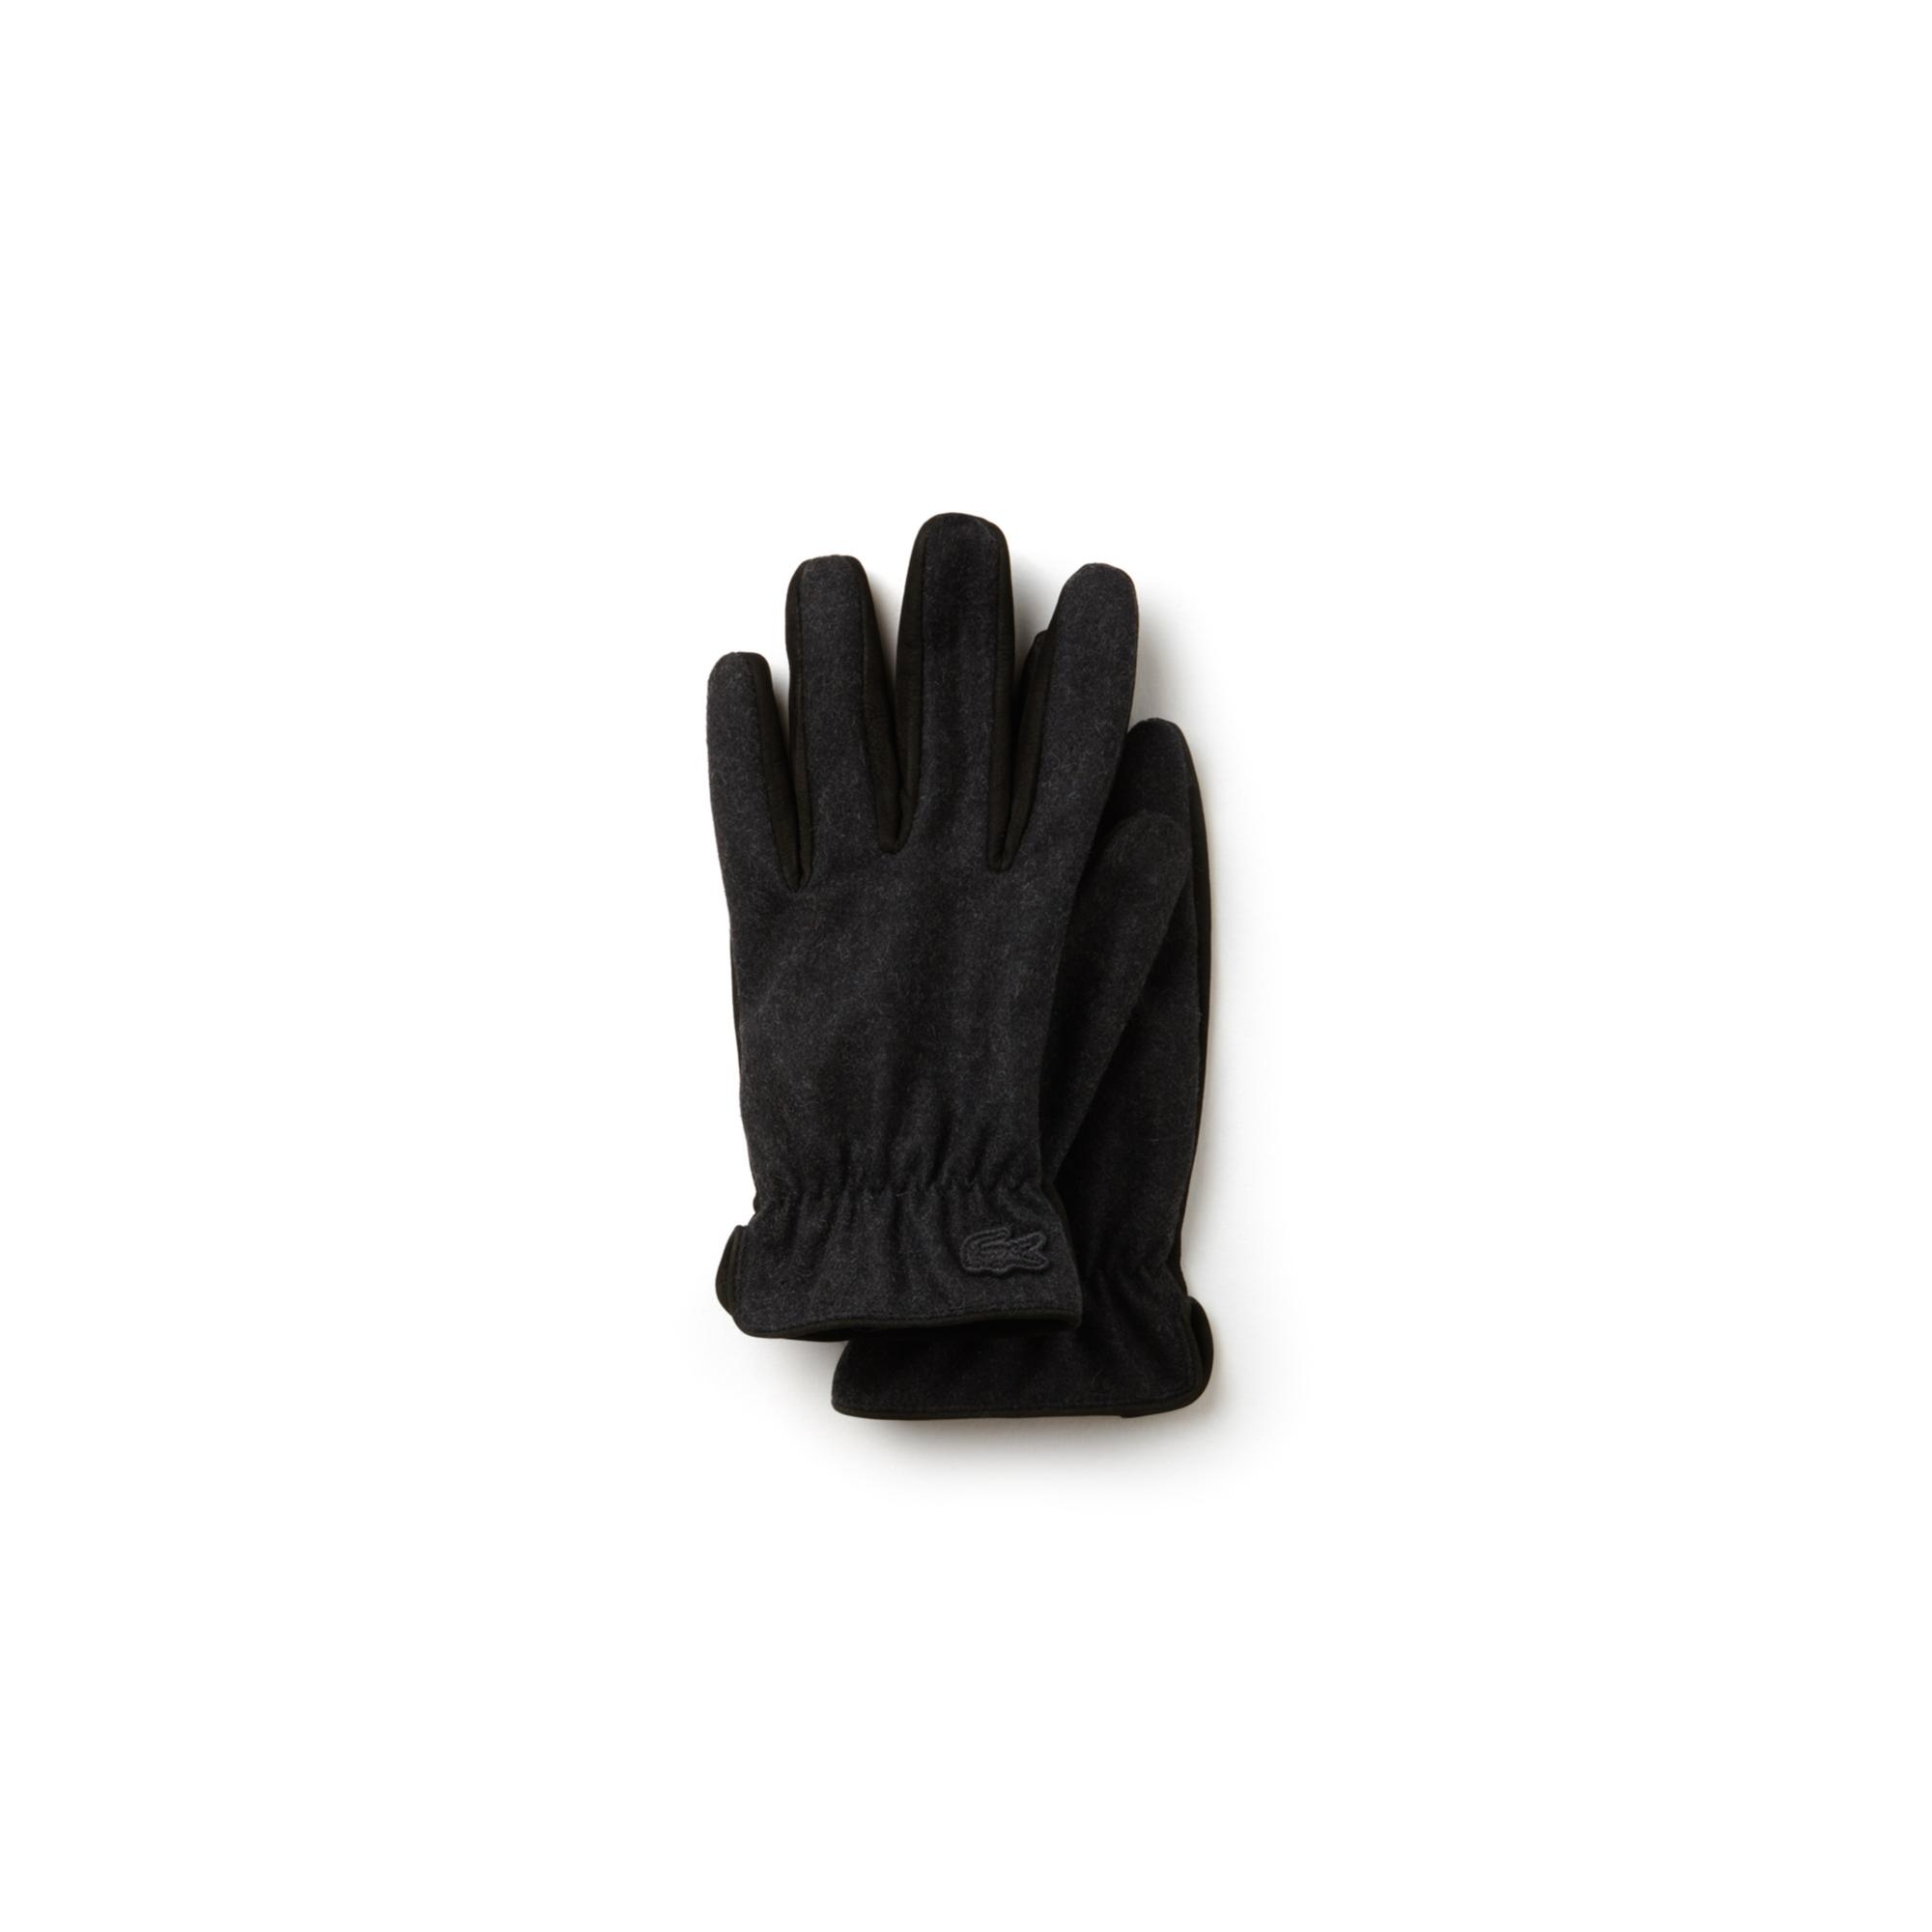 Lacoste Men's Leather Gloves